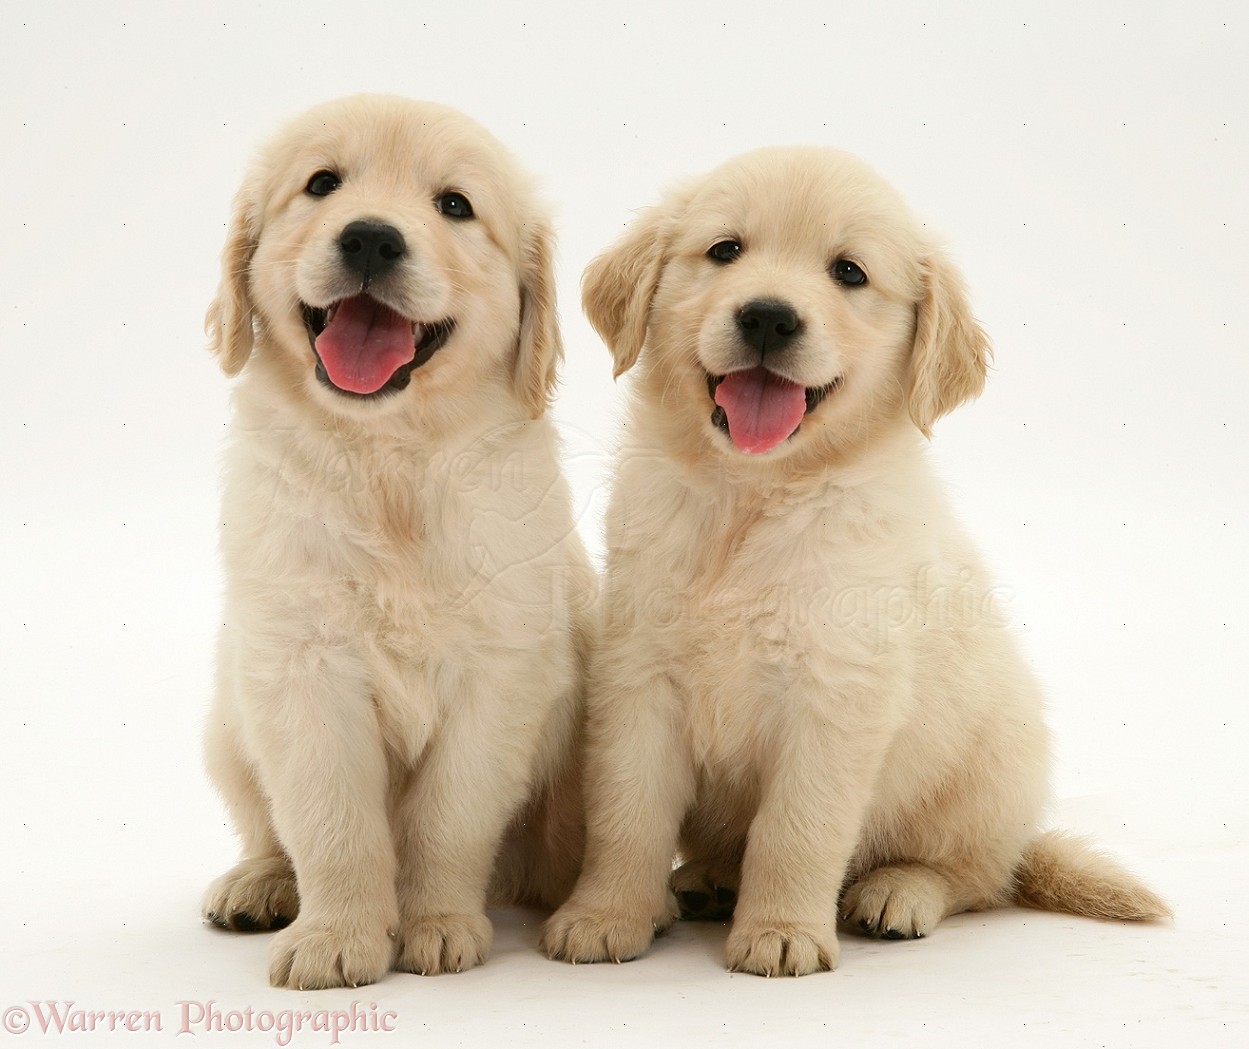 Dogs Two Golden Retriever Pups Sitting Photo Wp14084